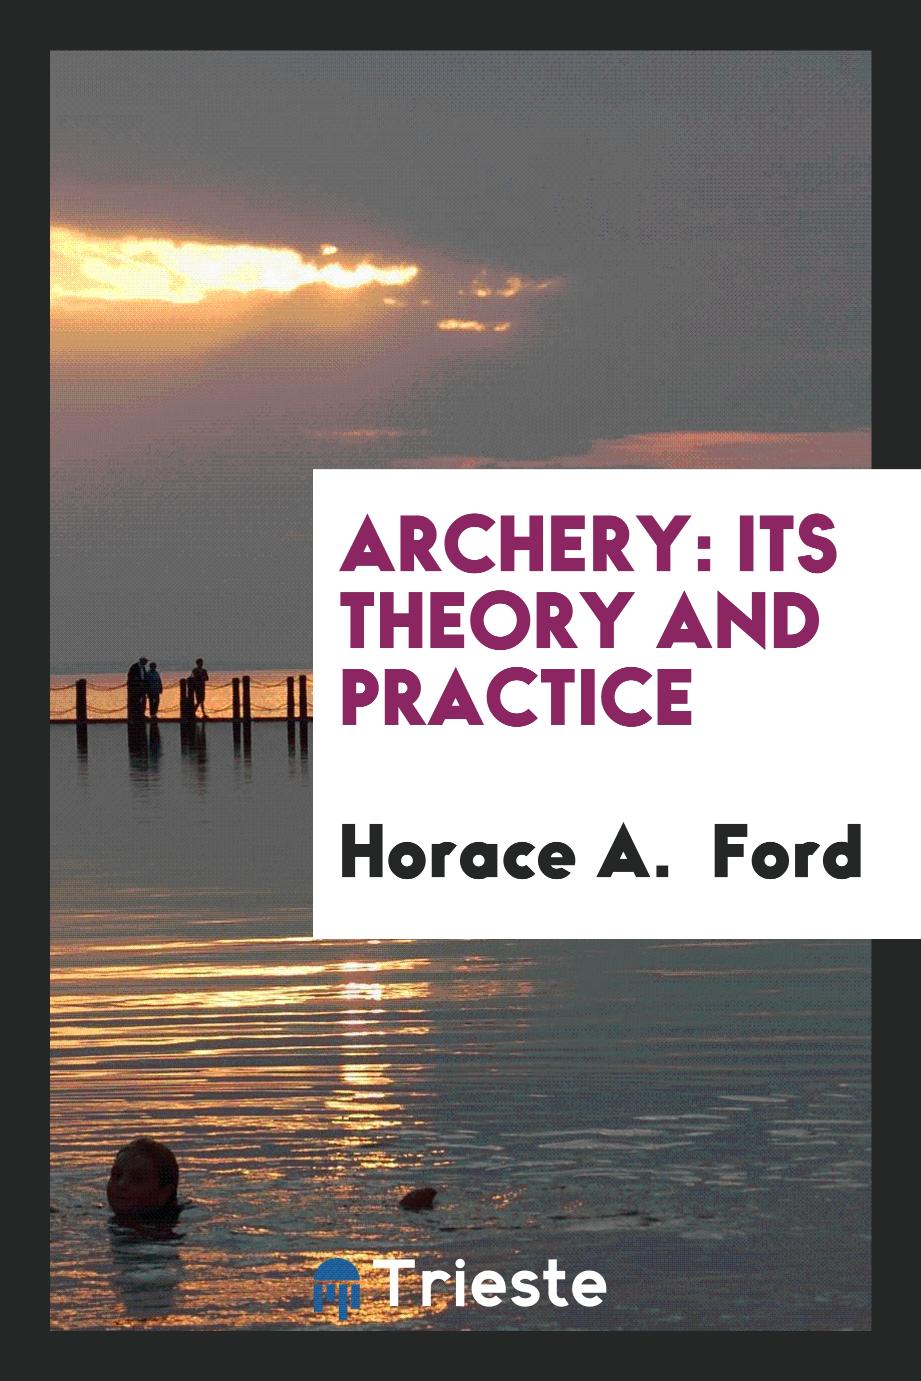 Archery: Its Theory And Practice